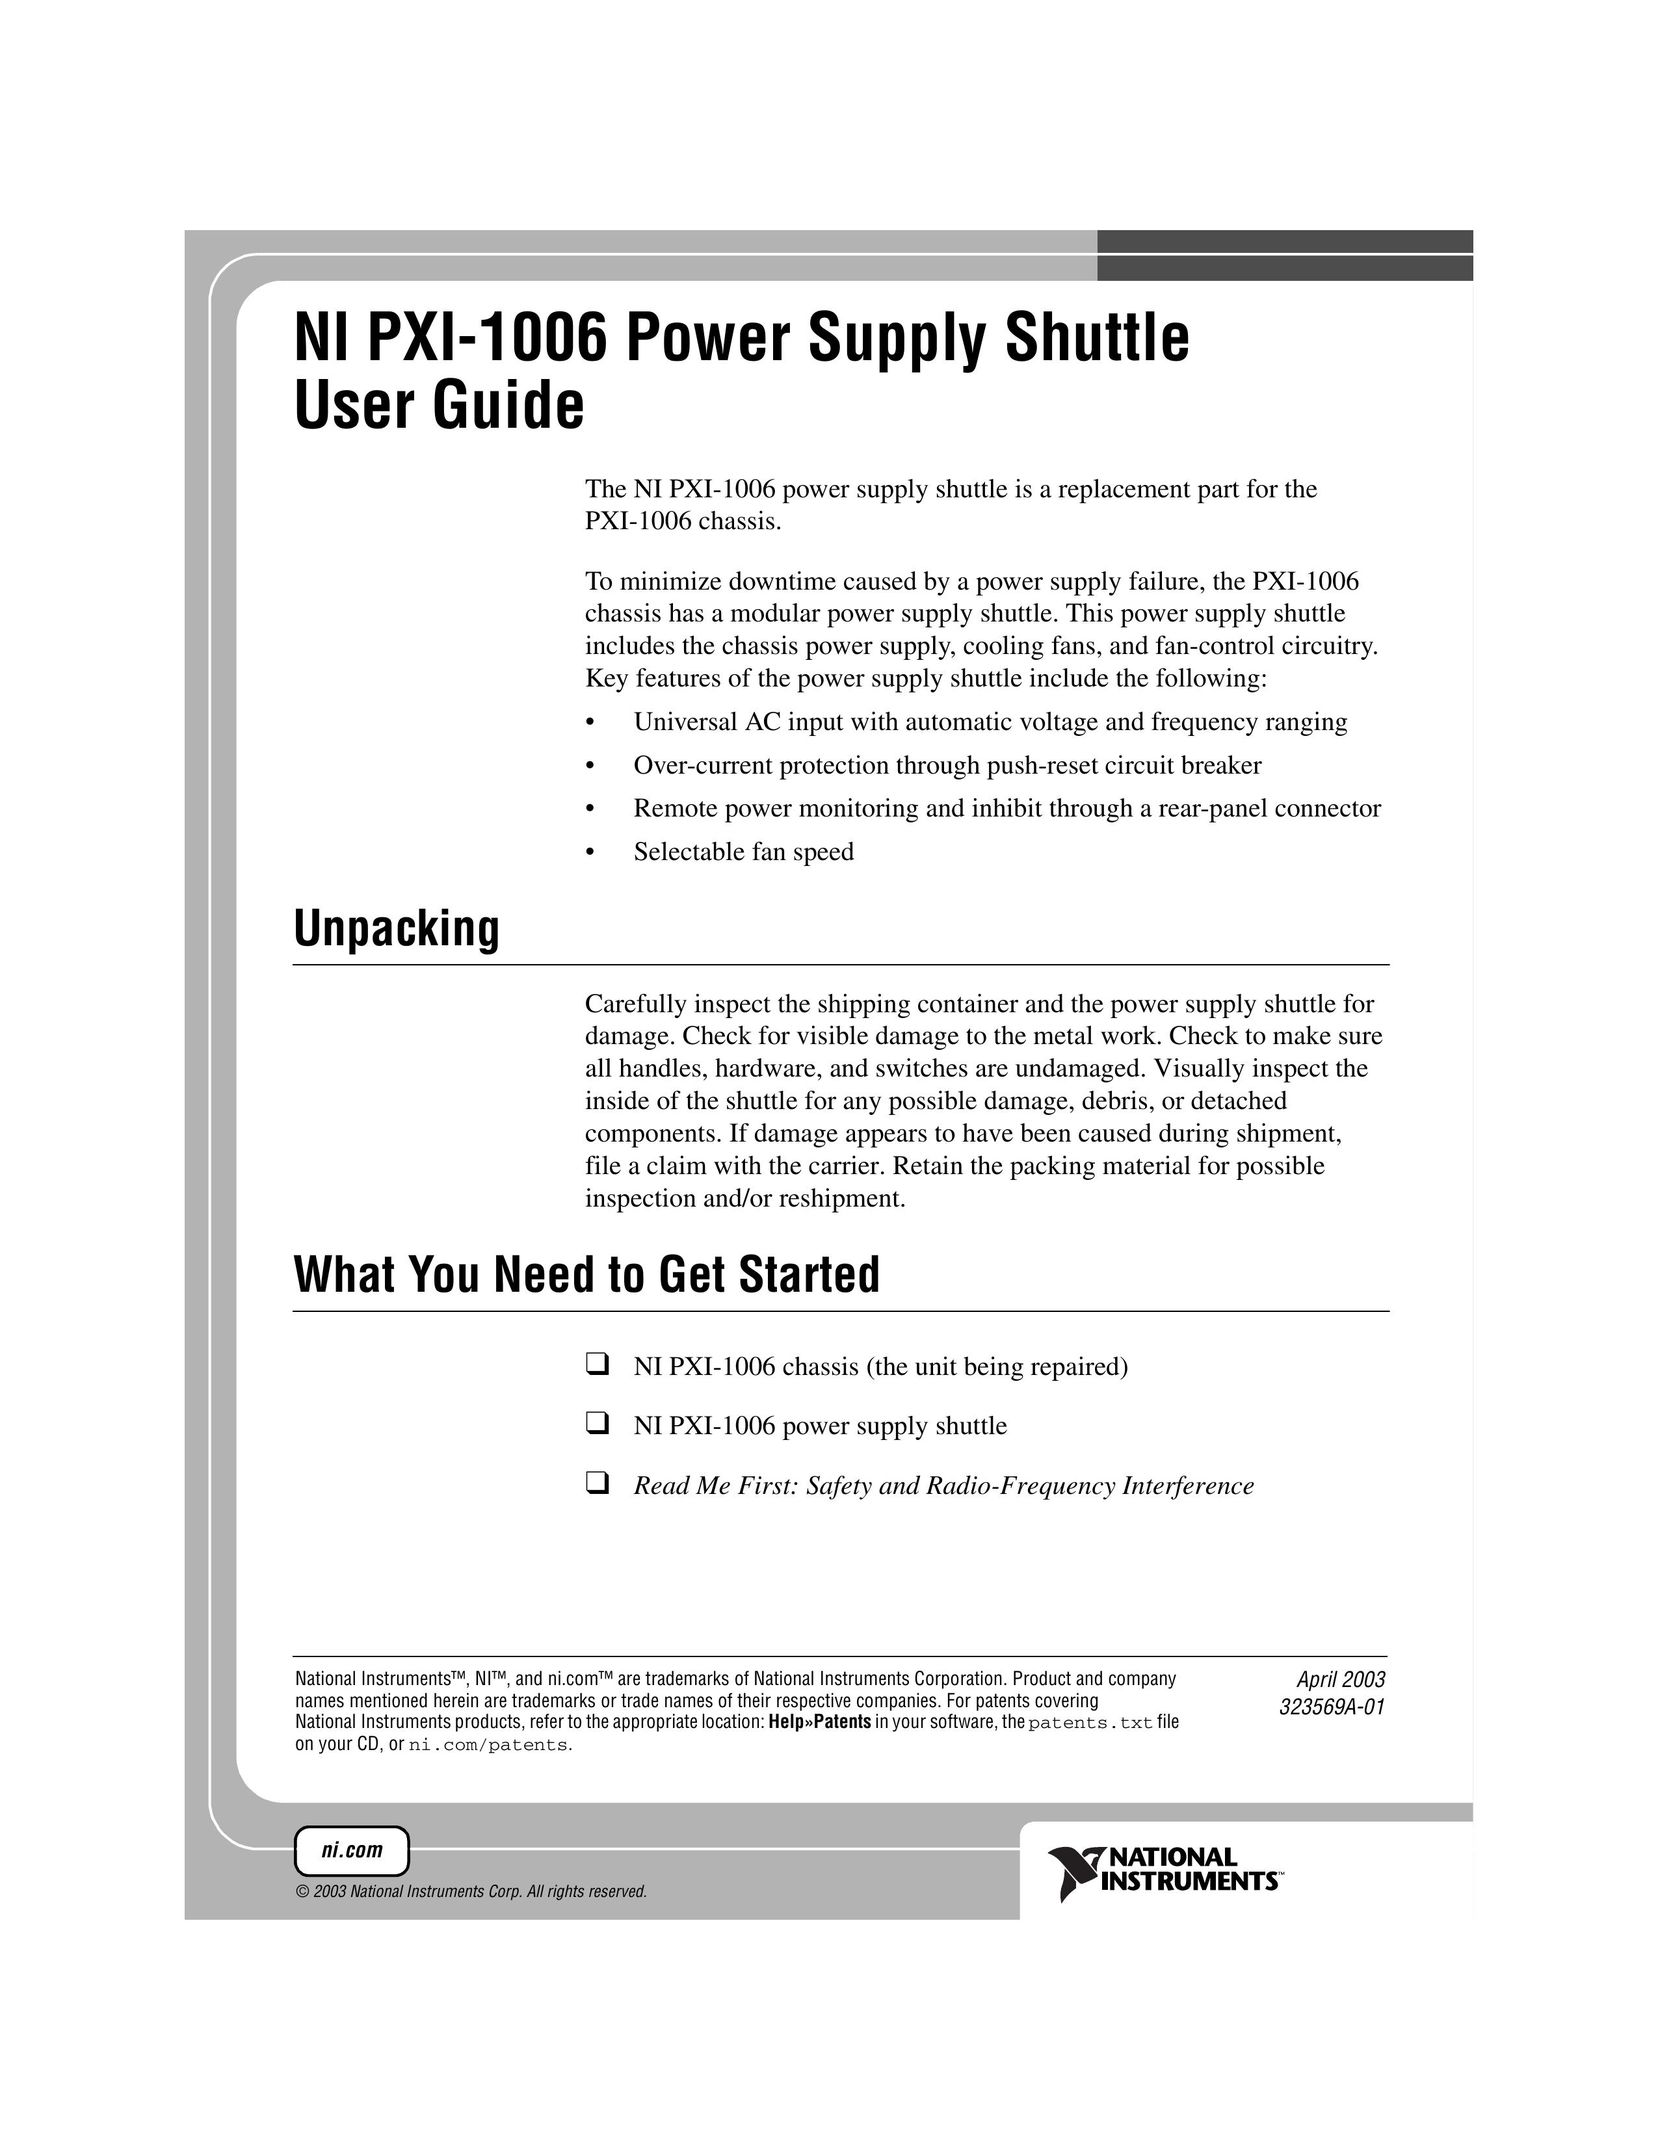 National Instruments NI PXI-1006 Power Supply User Manual